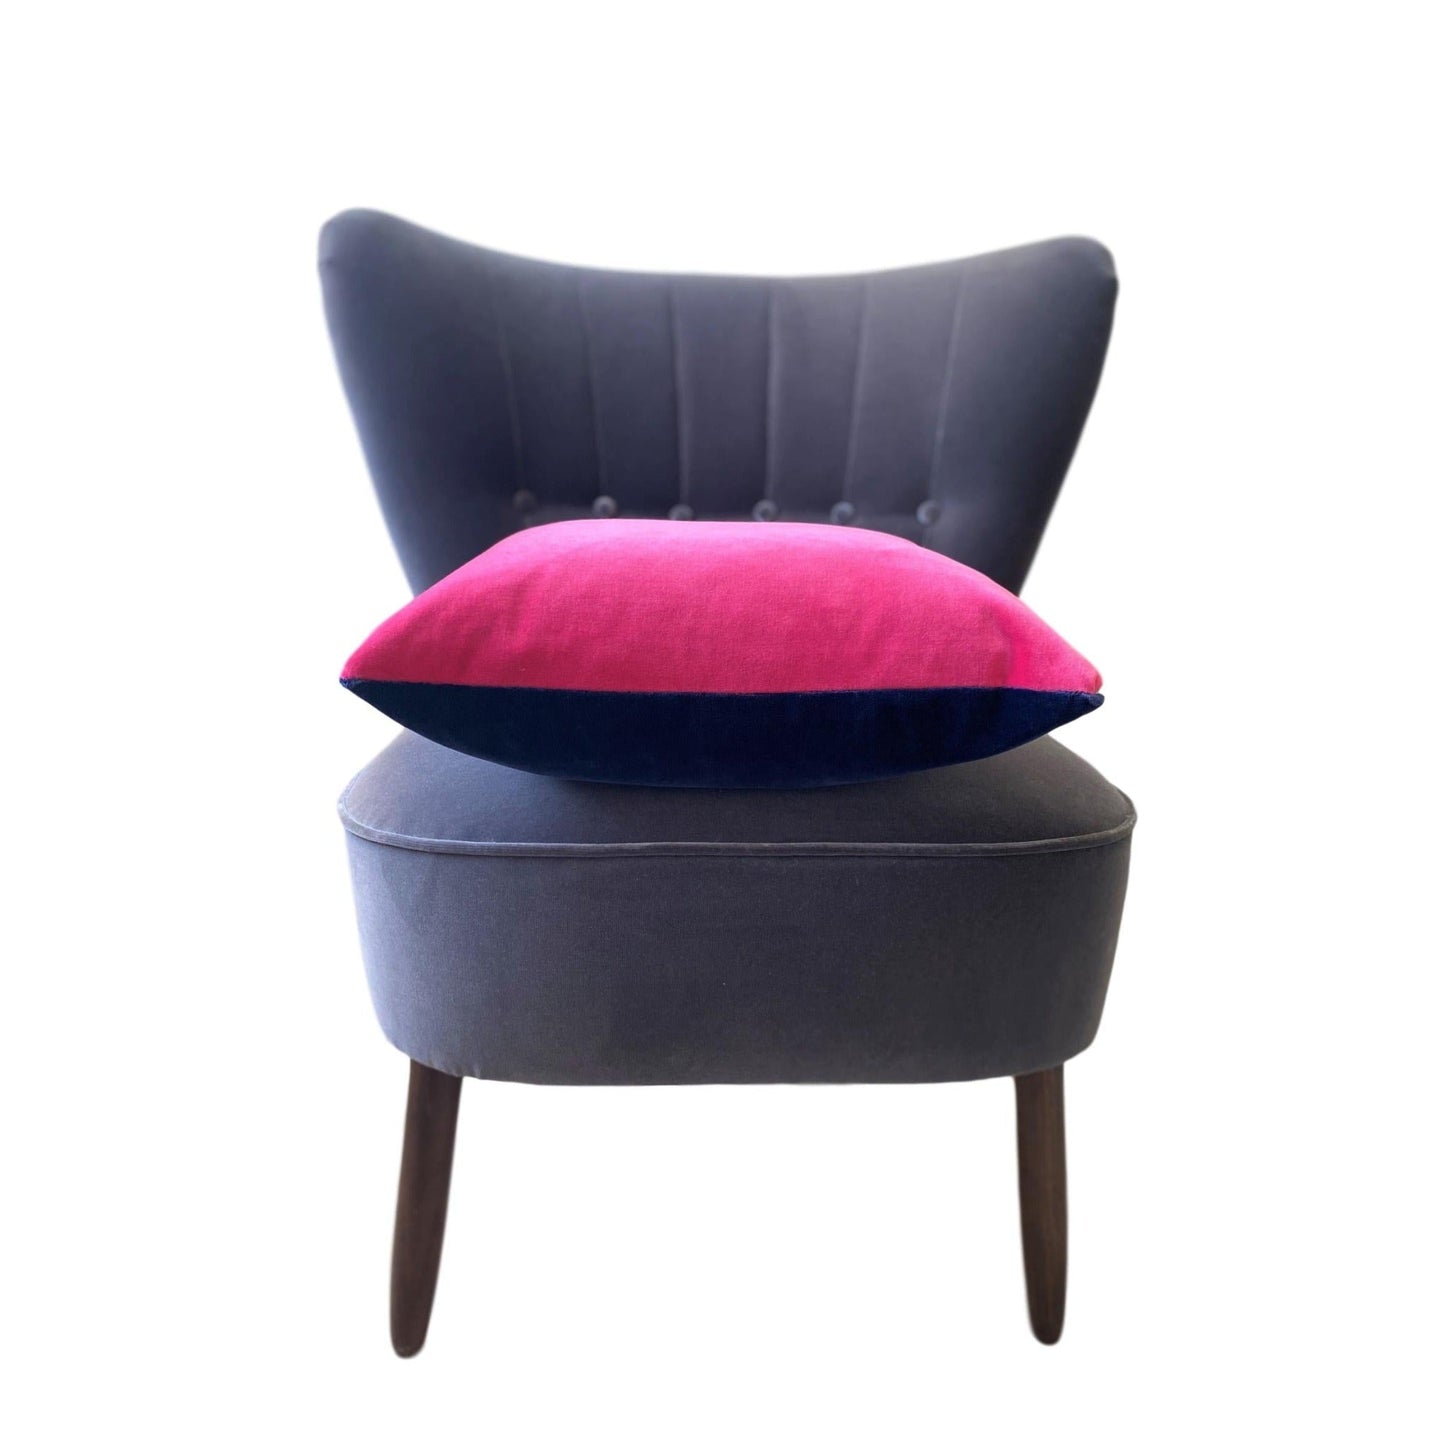 Bright Pink Velvet Cushion Cover with Navy-Luxe 39